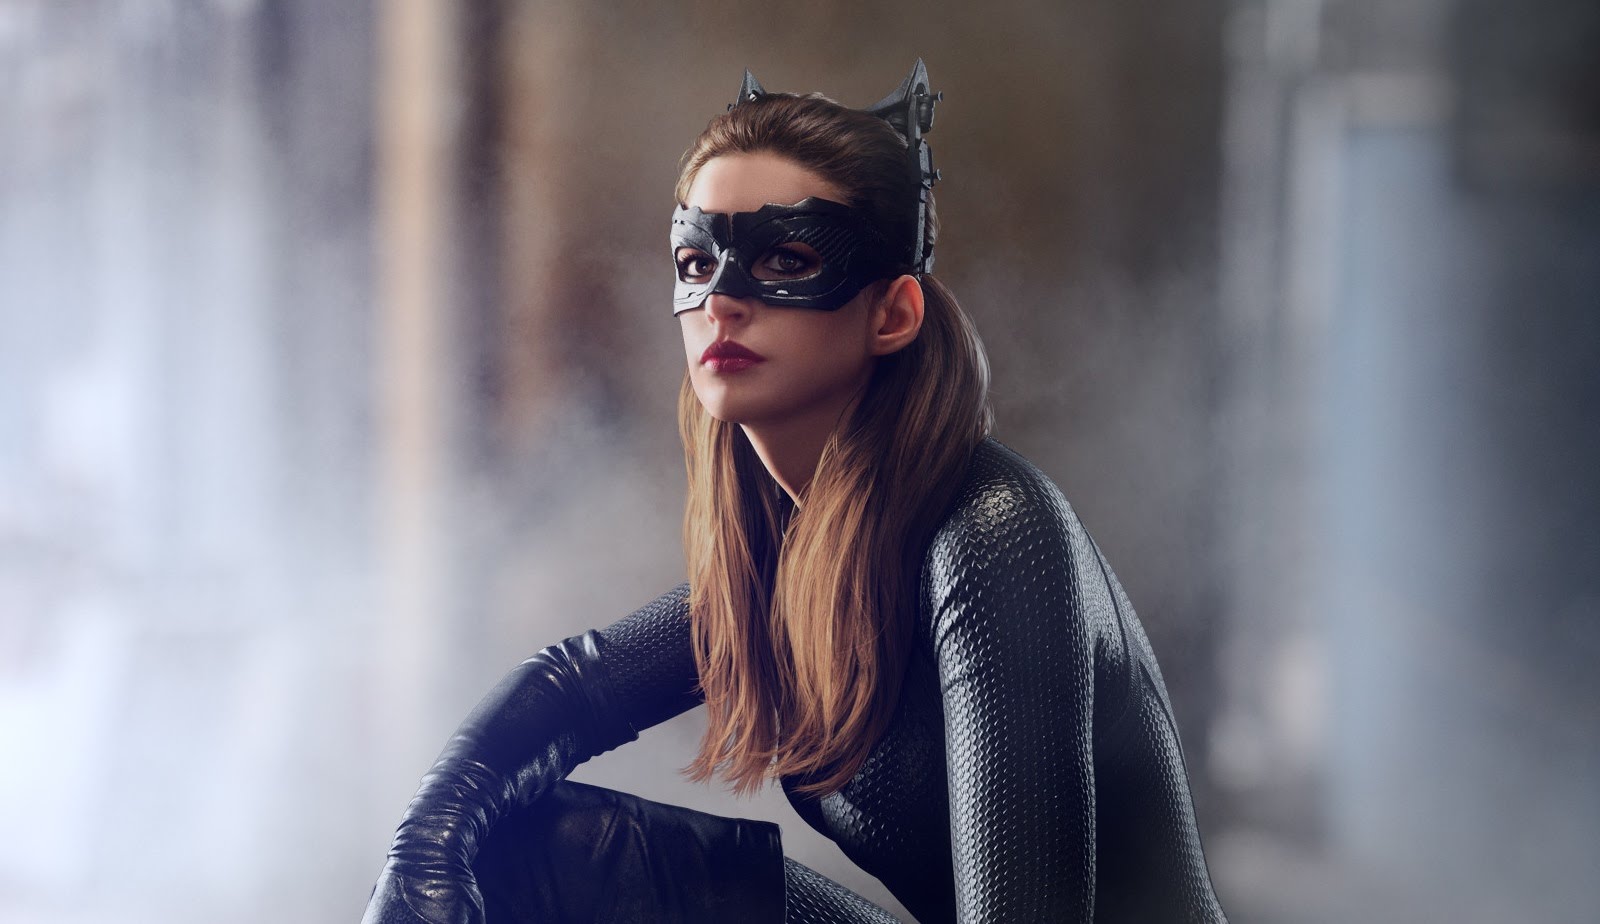 The+dark+knight+rises+catwoman+anne+hathaway